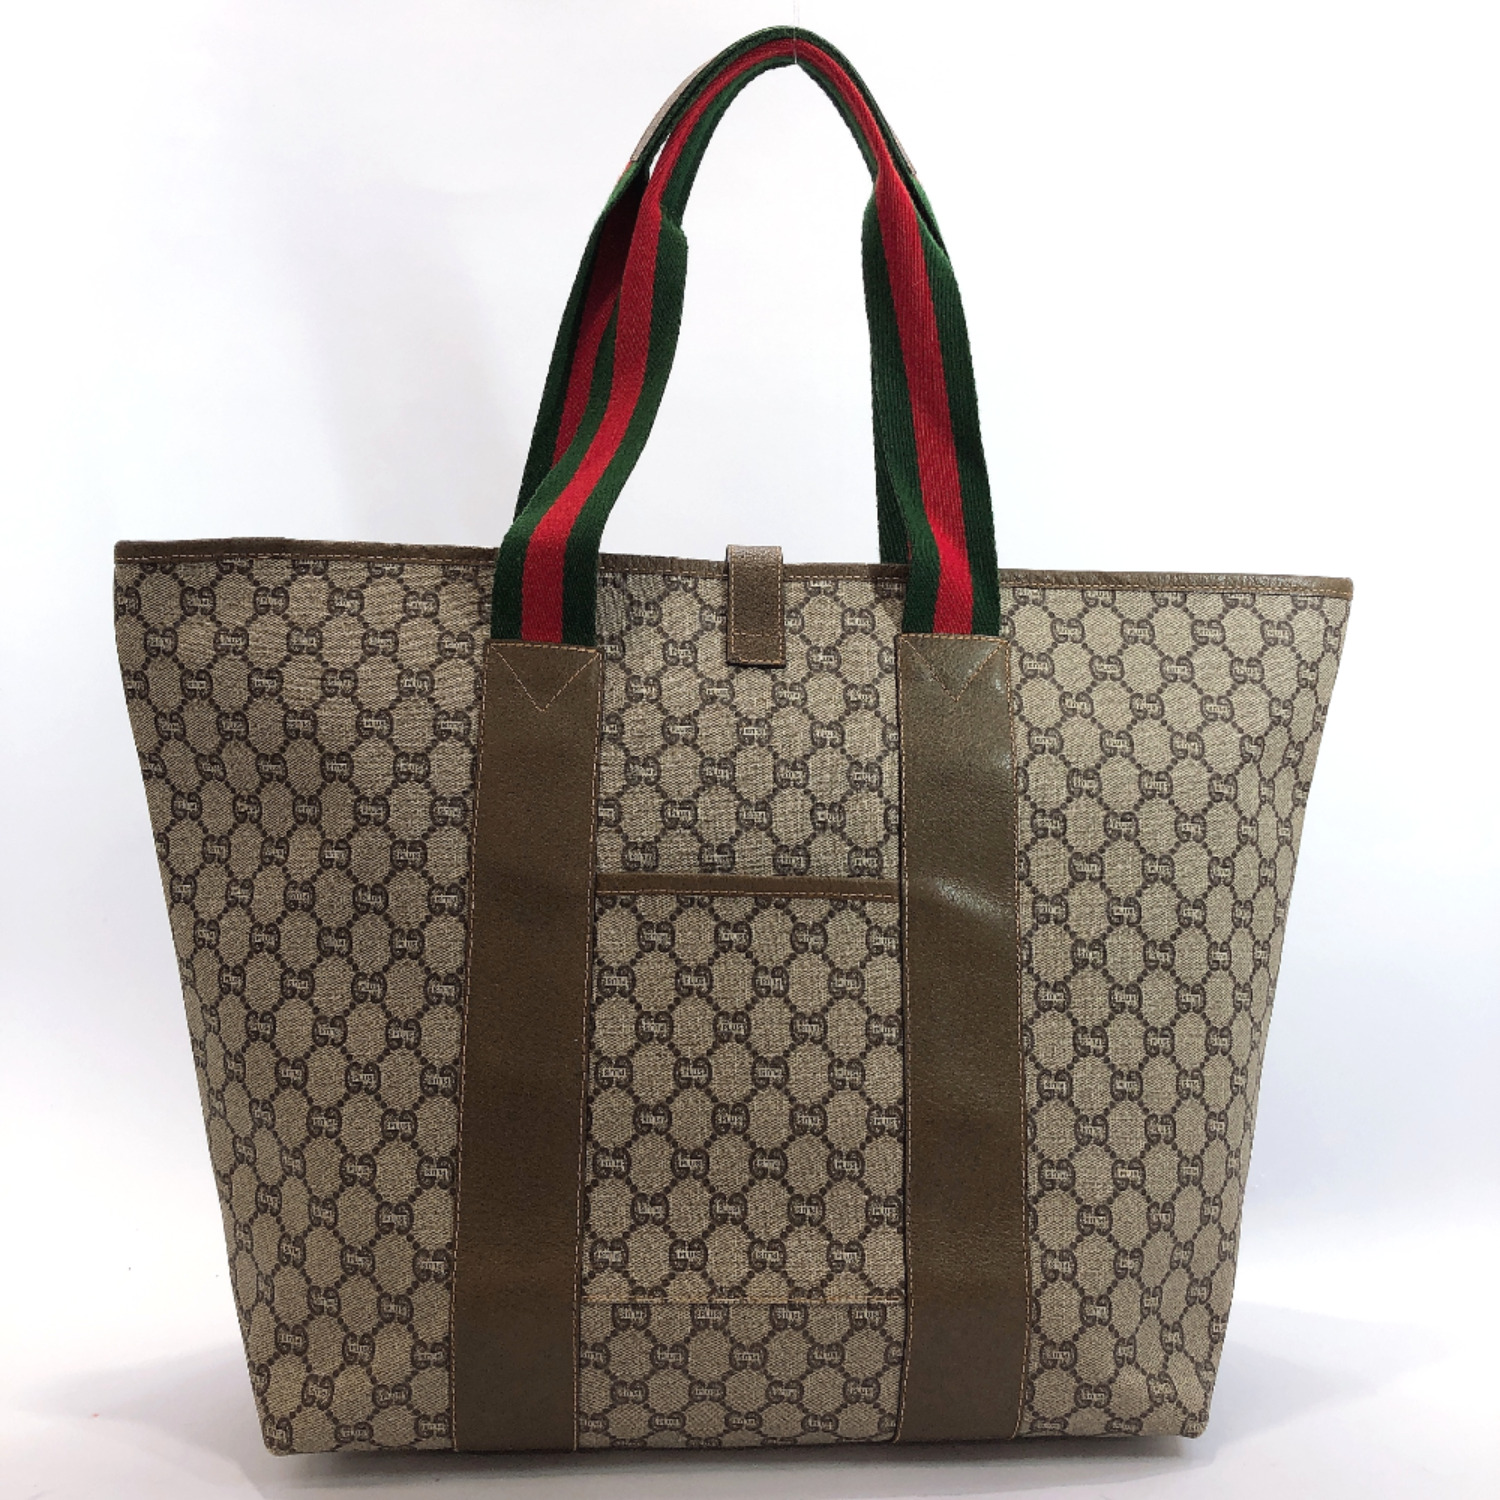 Authentic GUCCI Tote Bag vintage GG PLUS/leather Brown | eBay